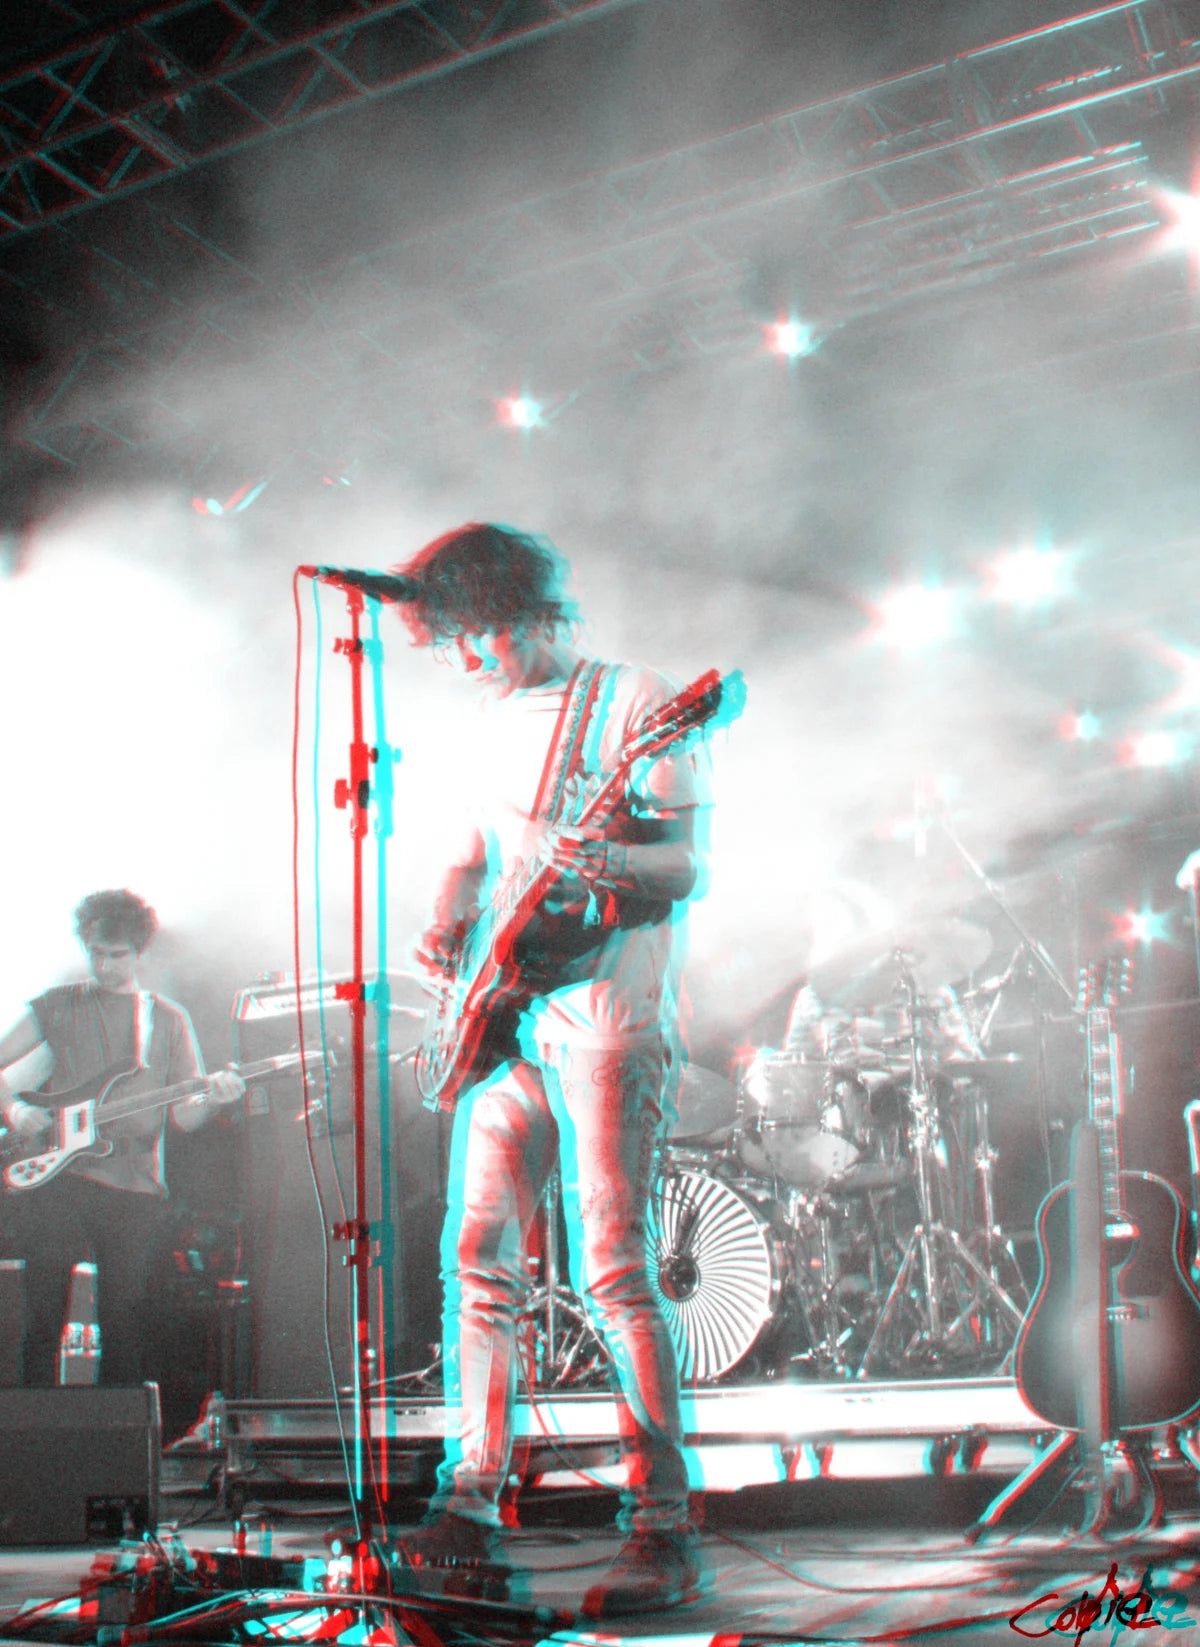 Coldie: Front Row 3D - Stereoscopic Concert Photography